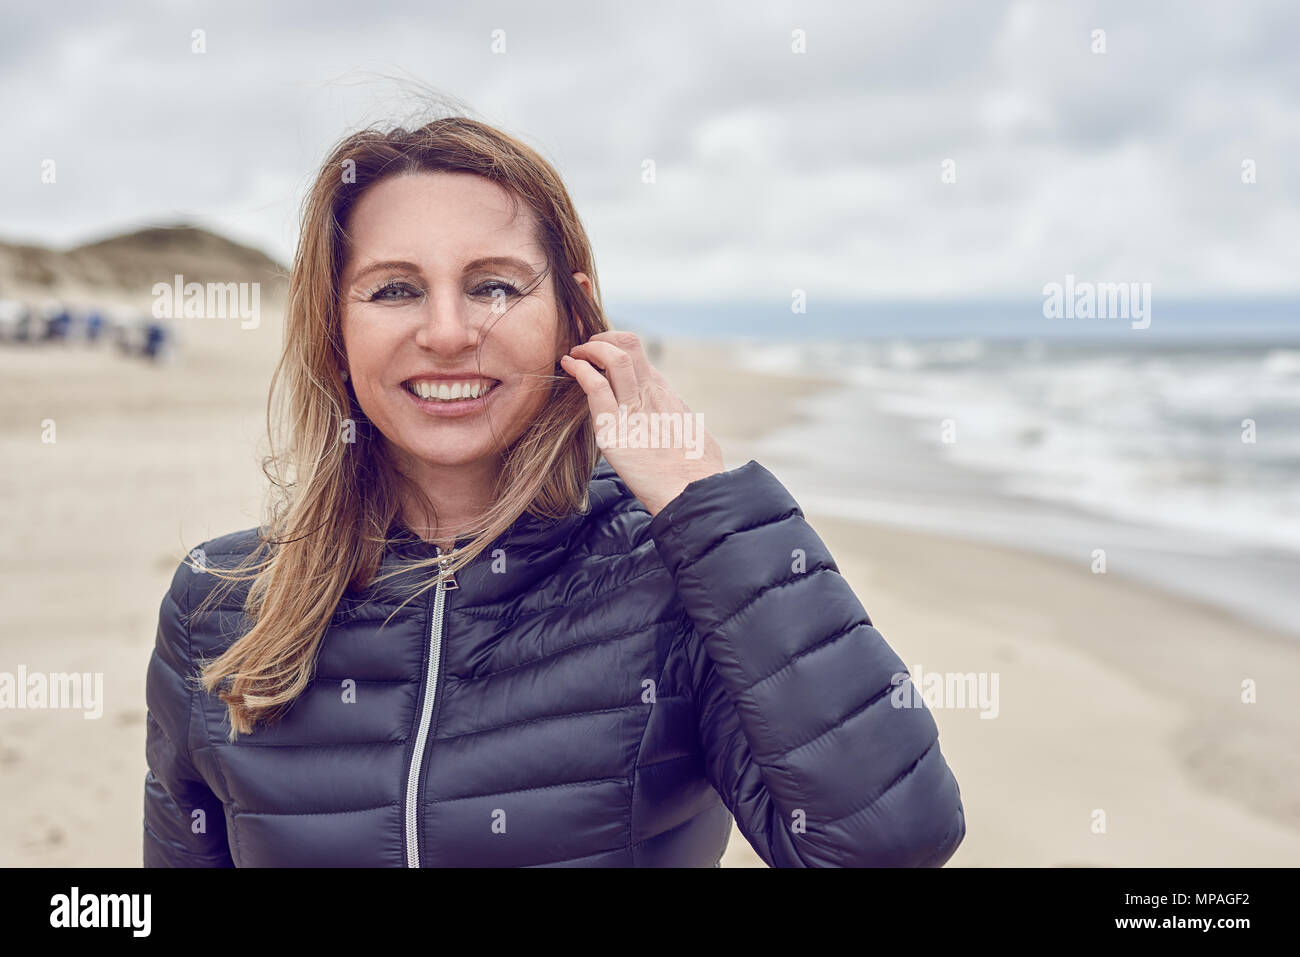 Attractive woman on a windswept beach Stock Photo